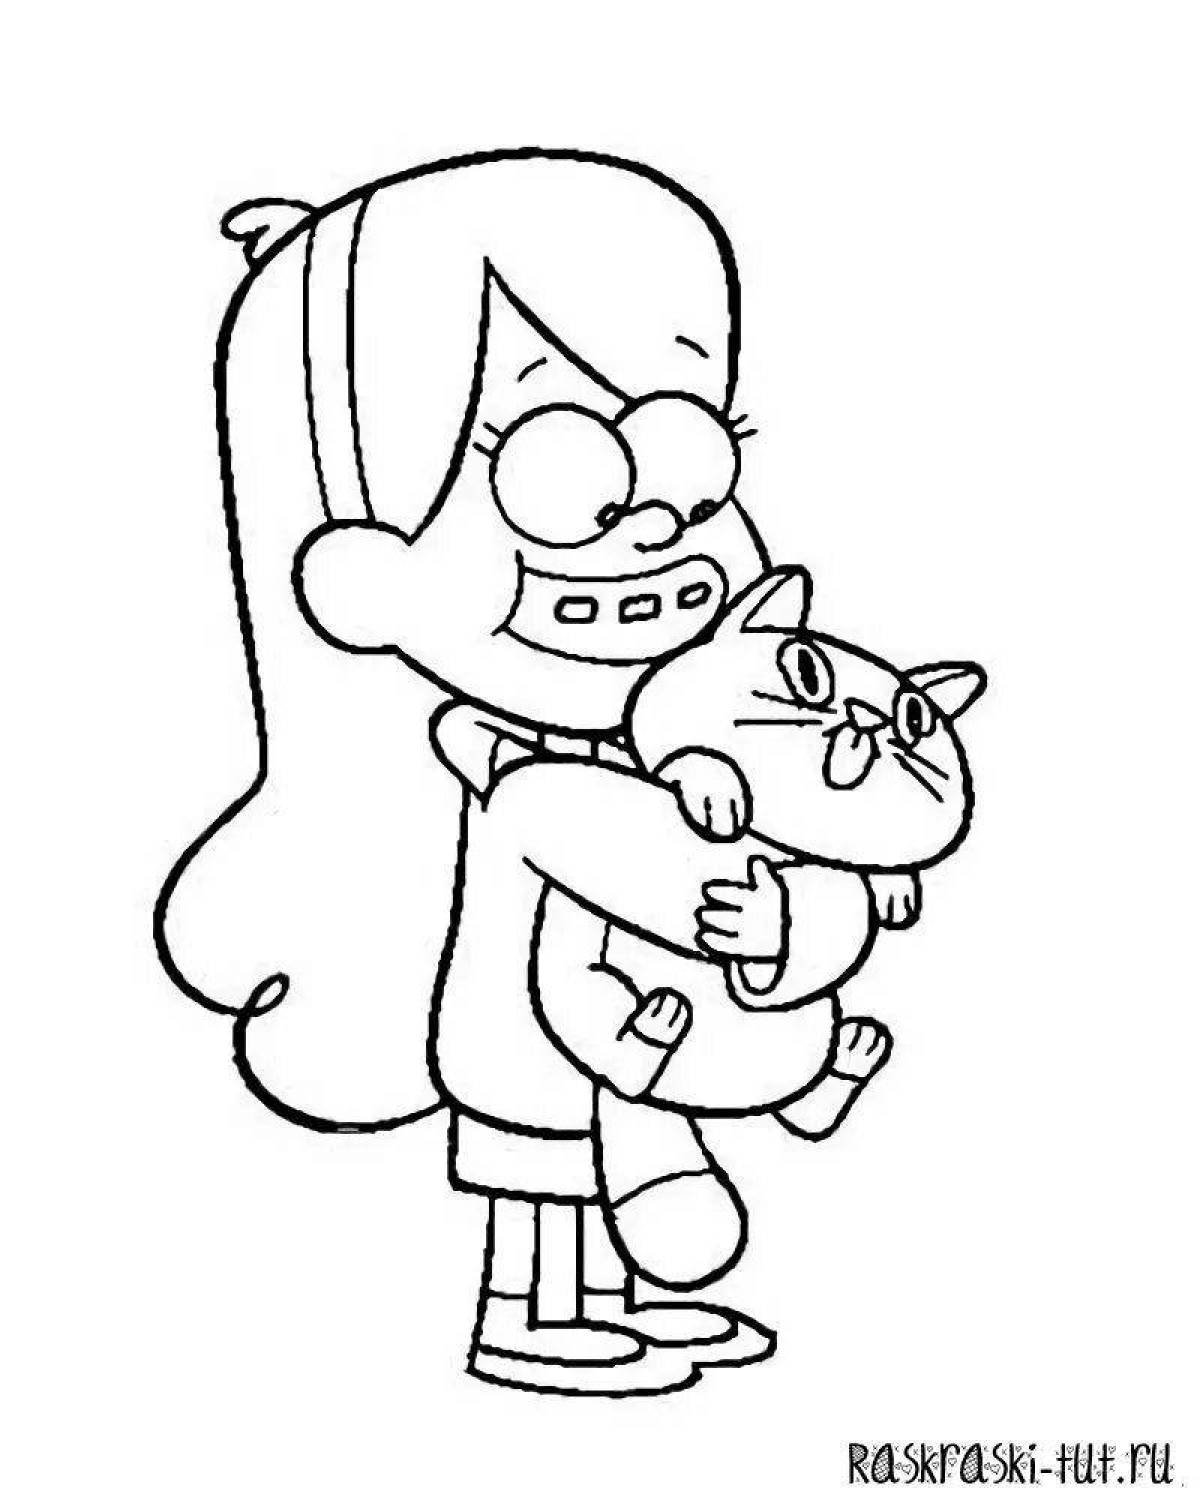 Colorful Gravity Falls Pig Coloring Page